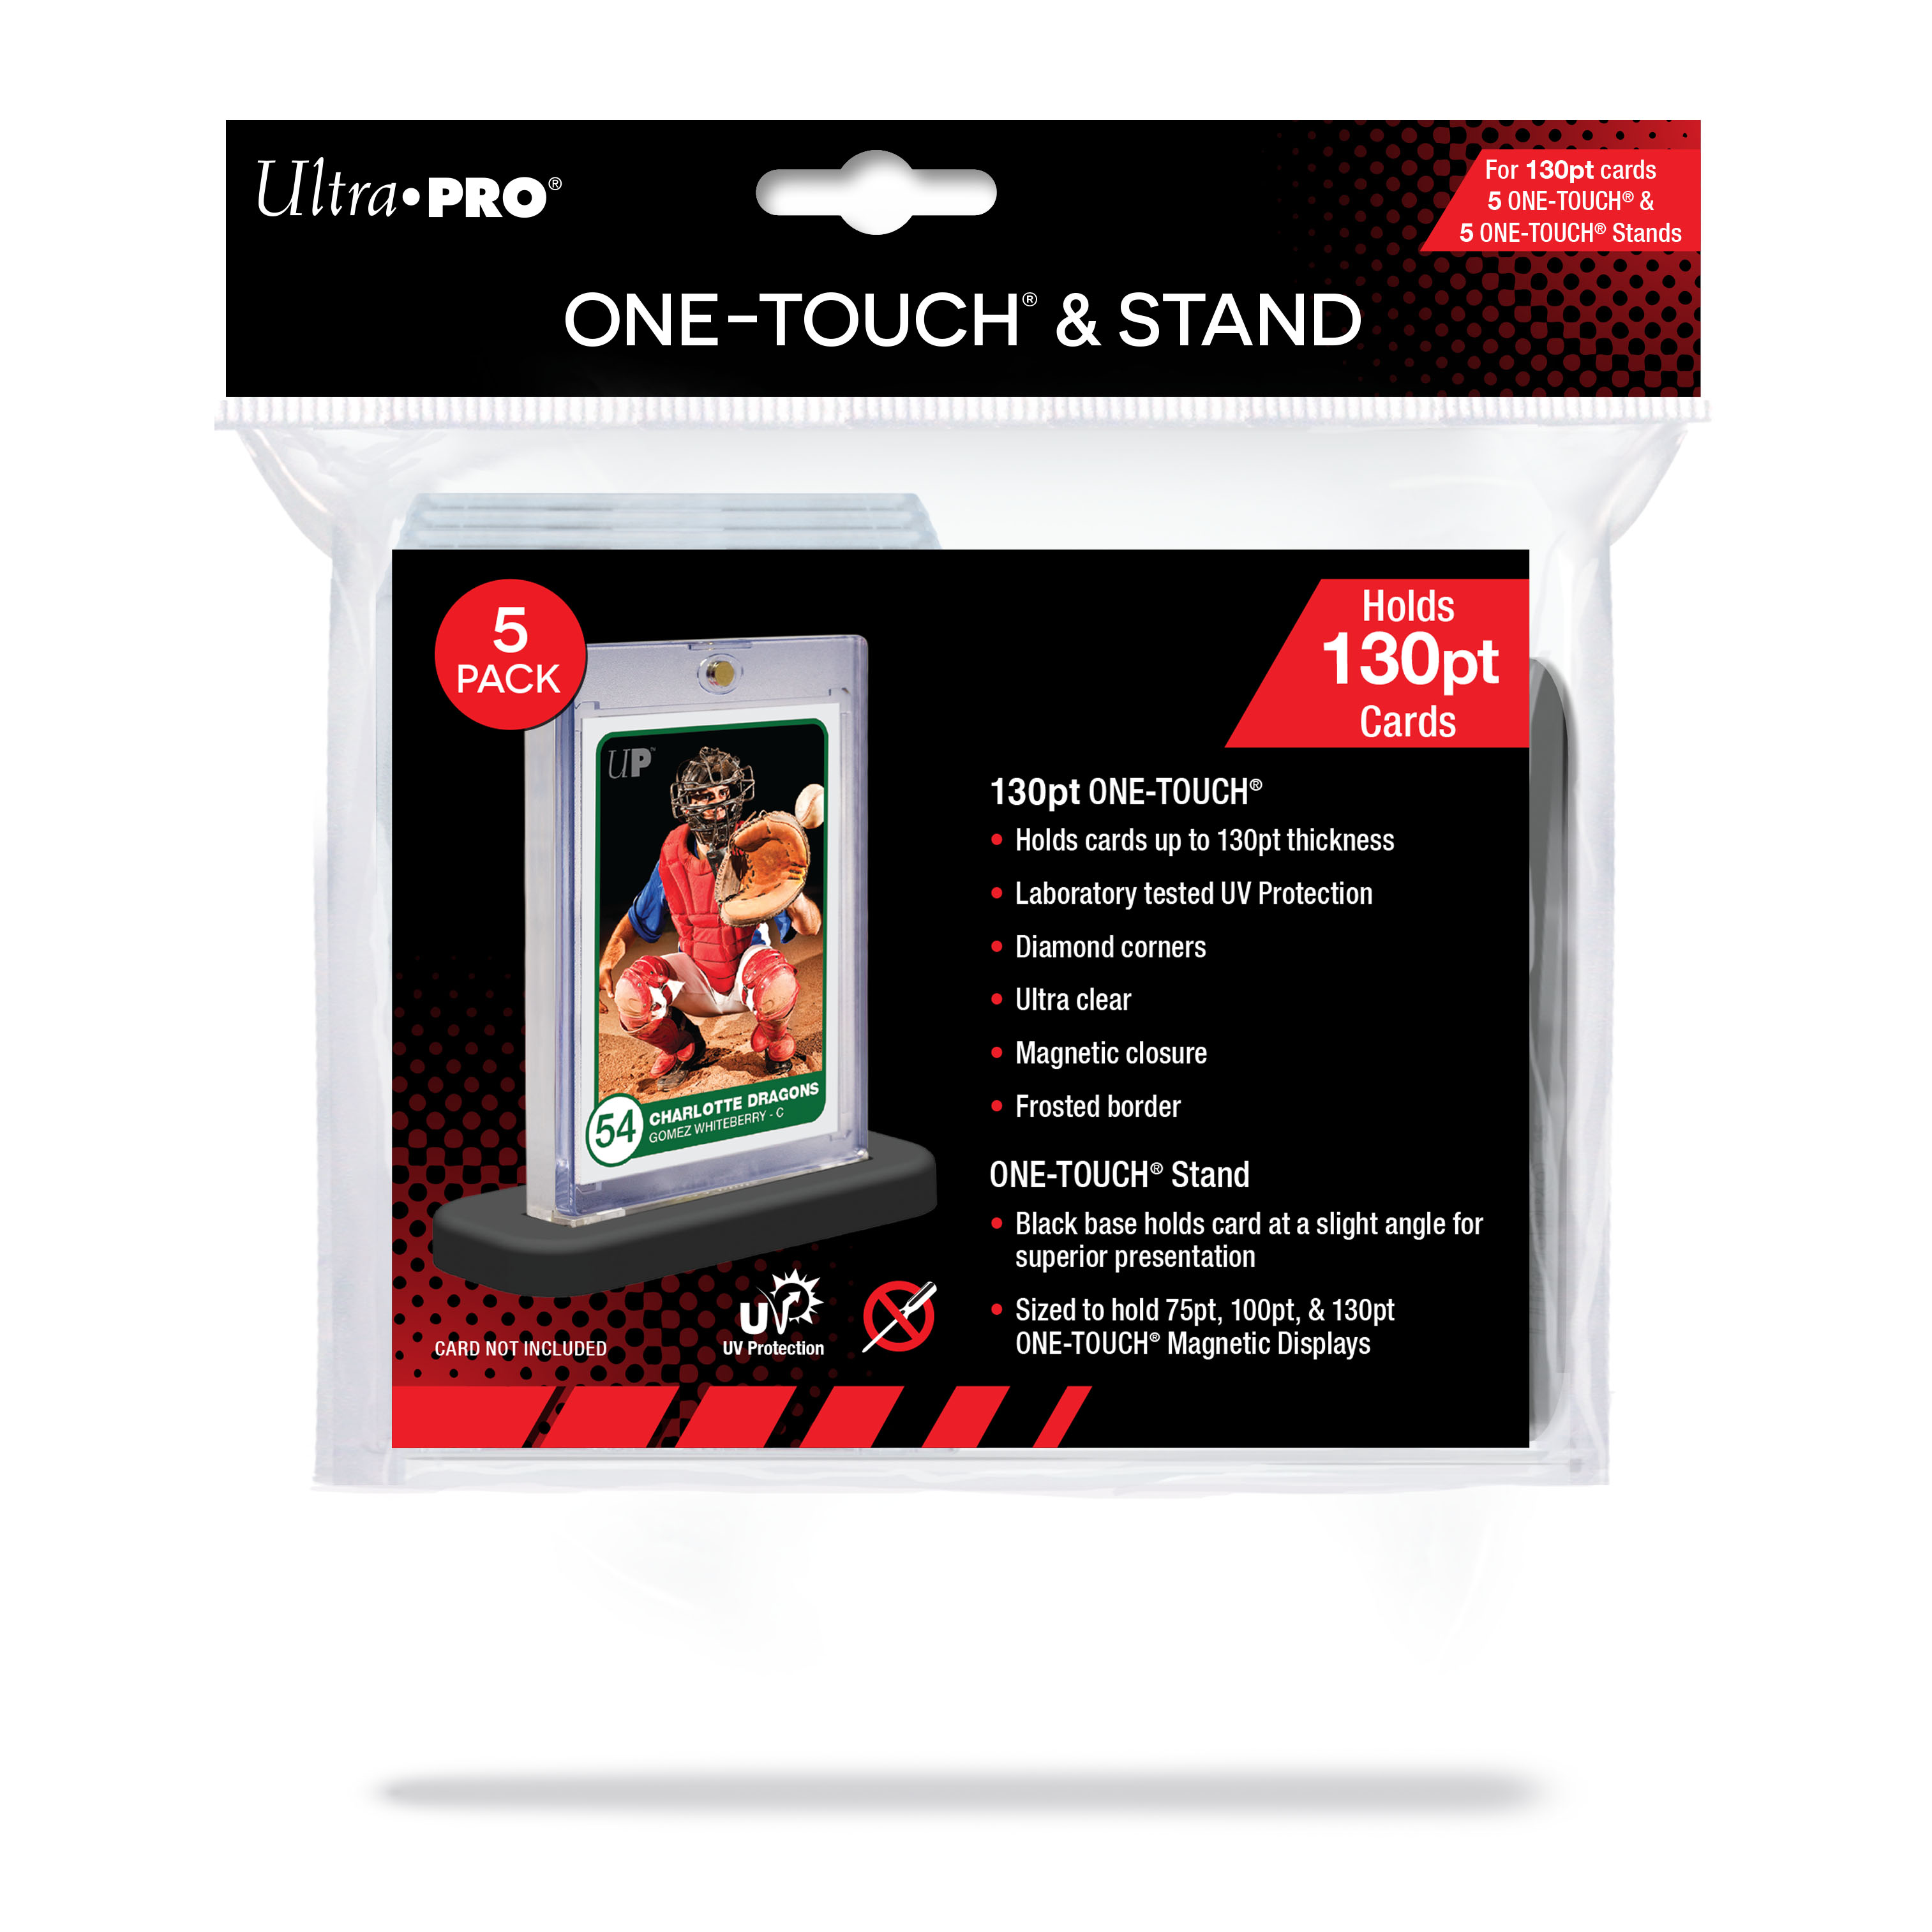 Ultra Pro 130pt UV One-Touch Magnetic Holder with Stand (5 count pack)